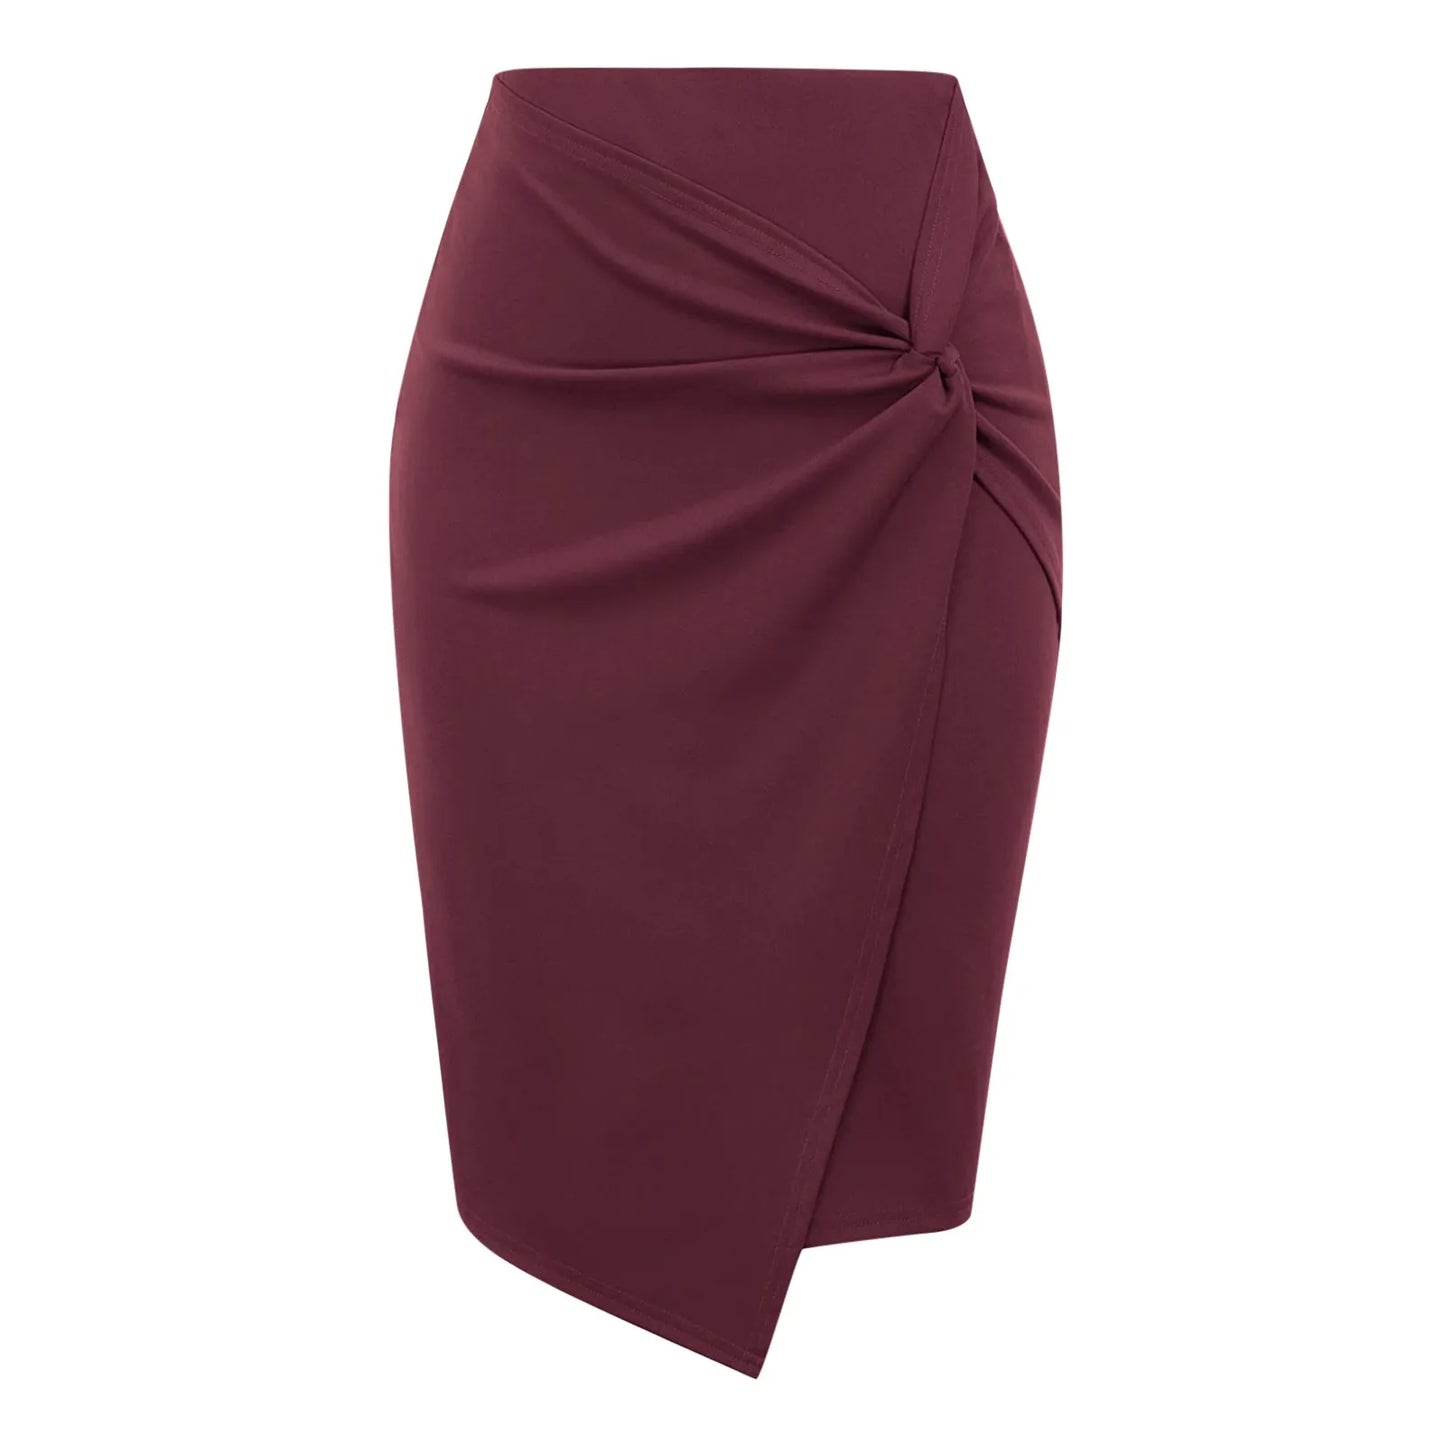 New Skirts Sexy Women Solid Color Skirts High Waist Female Fashion Bodycon Irregular Office Lady Party Clubwear Skirts 2024